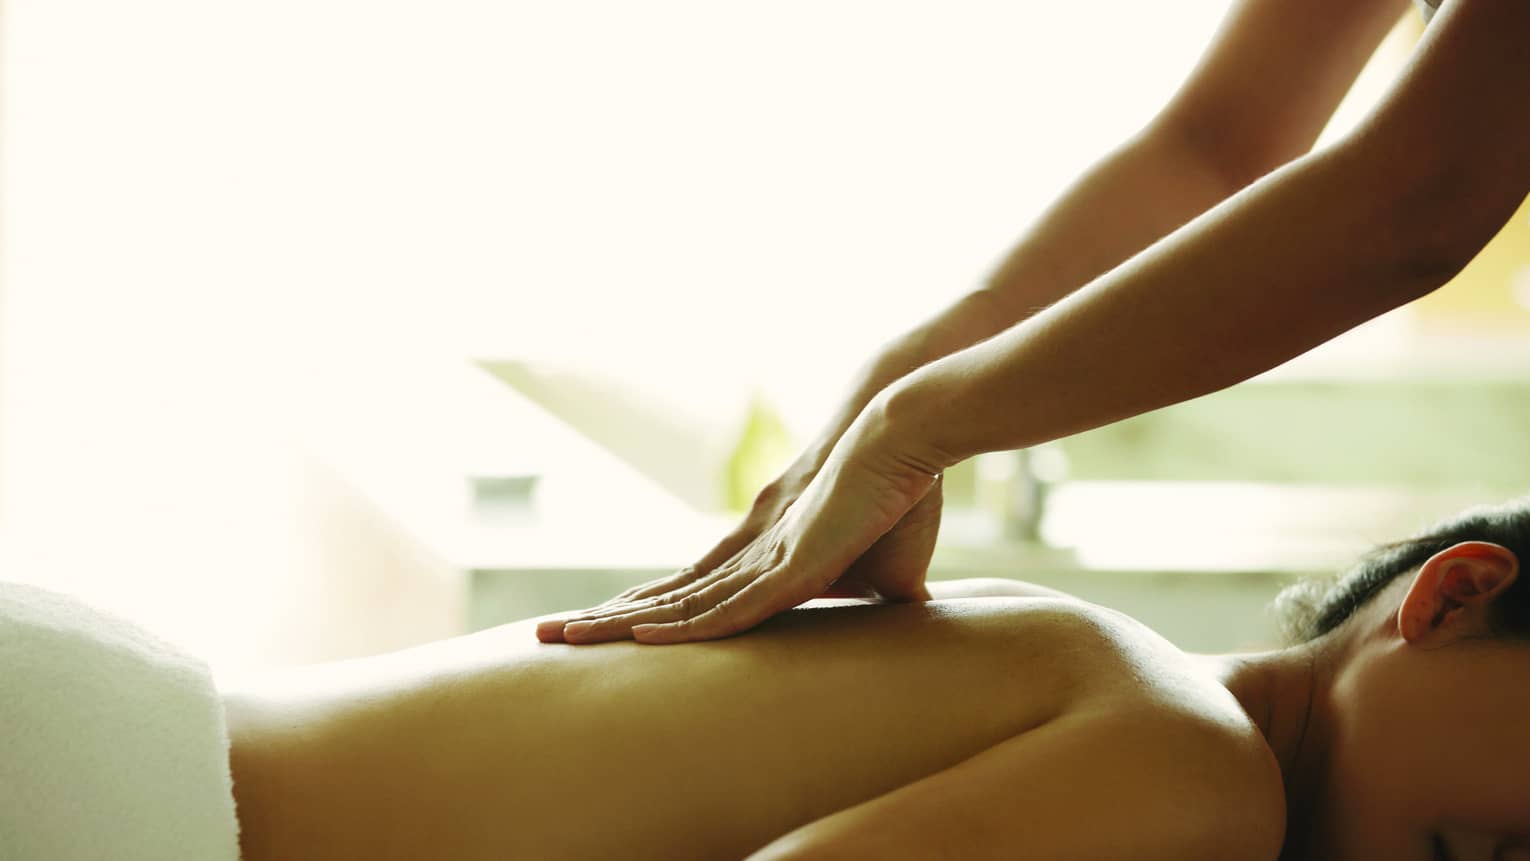 Masseuse reaches over, massages woman's bare back as she lies on spa table